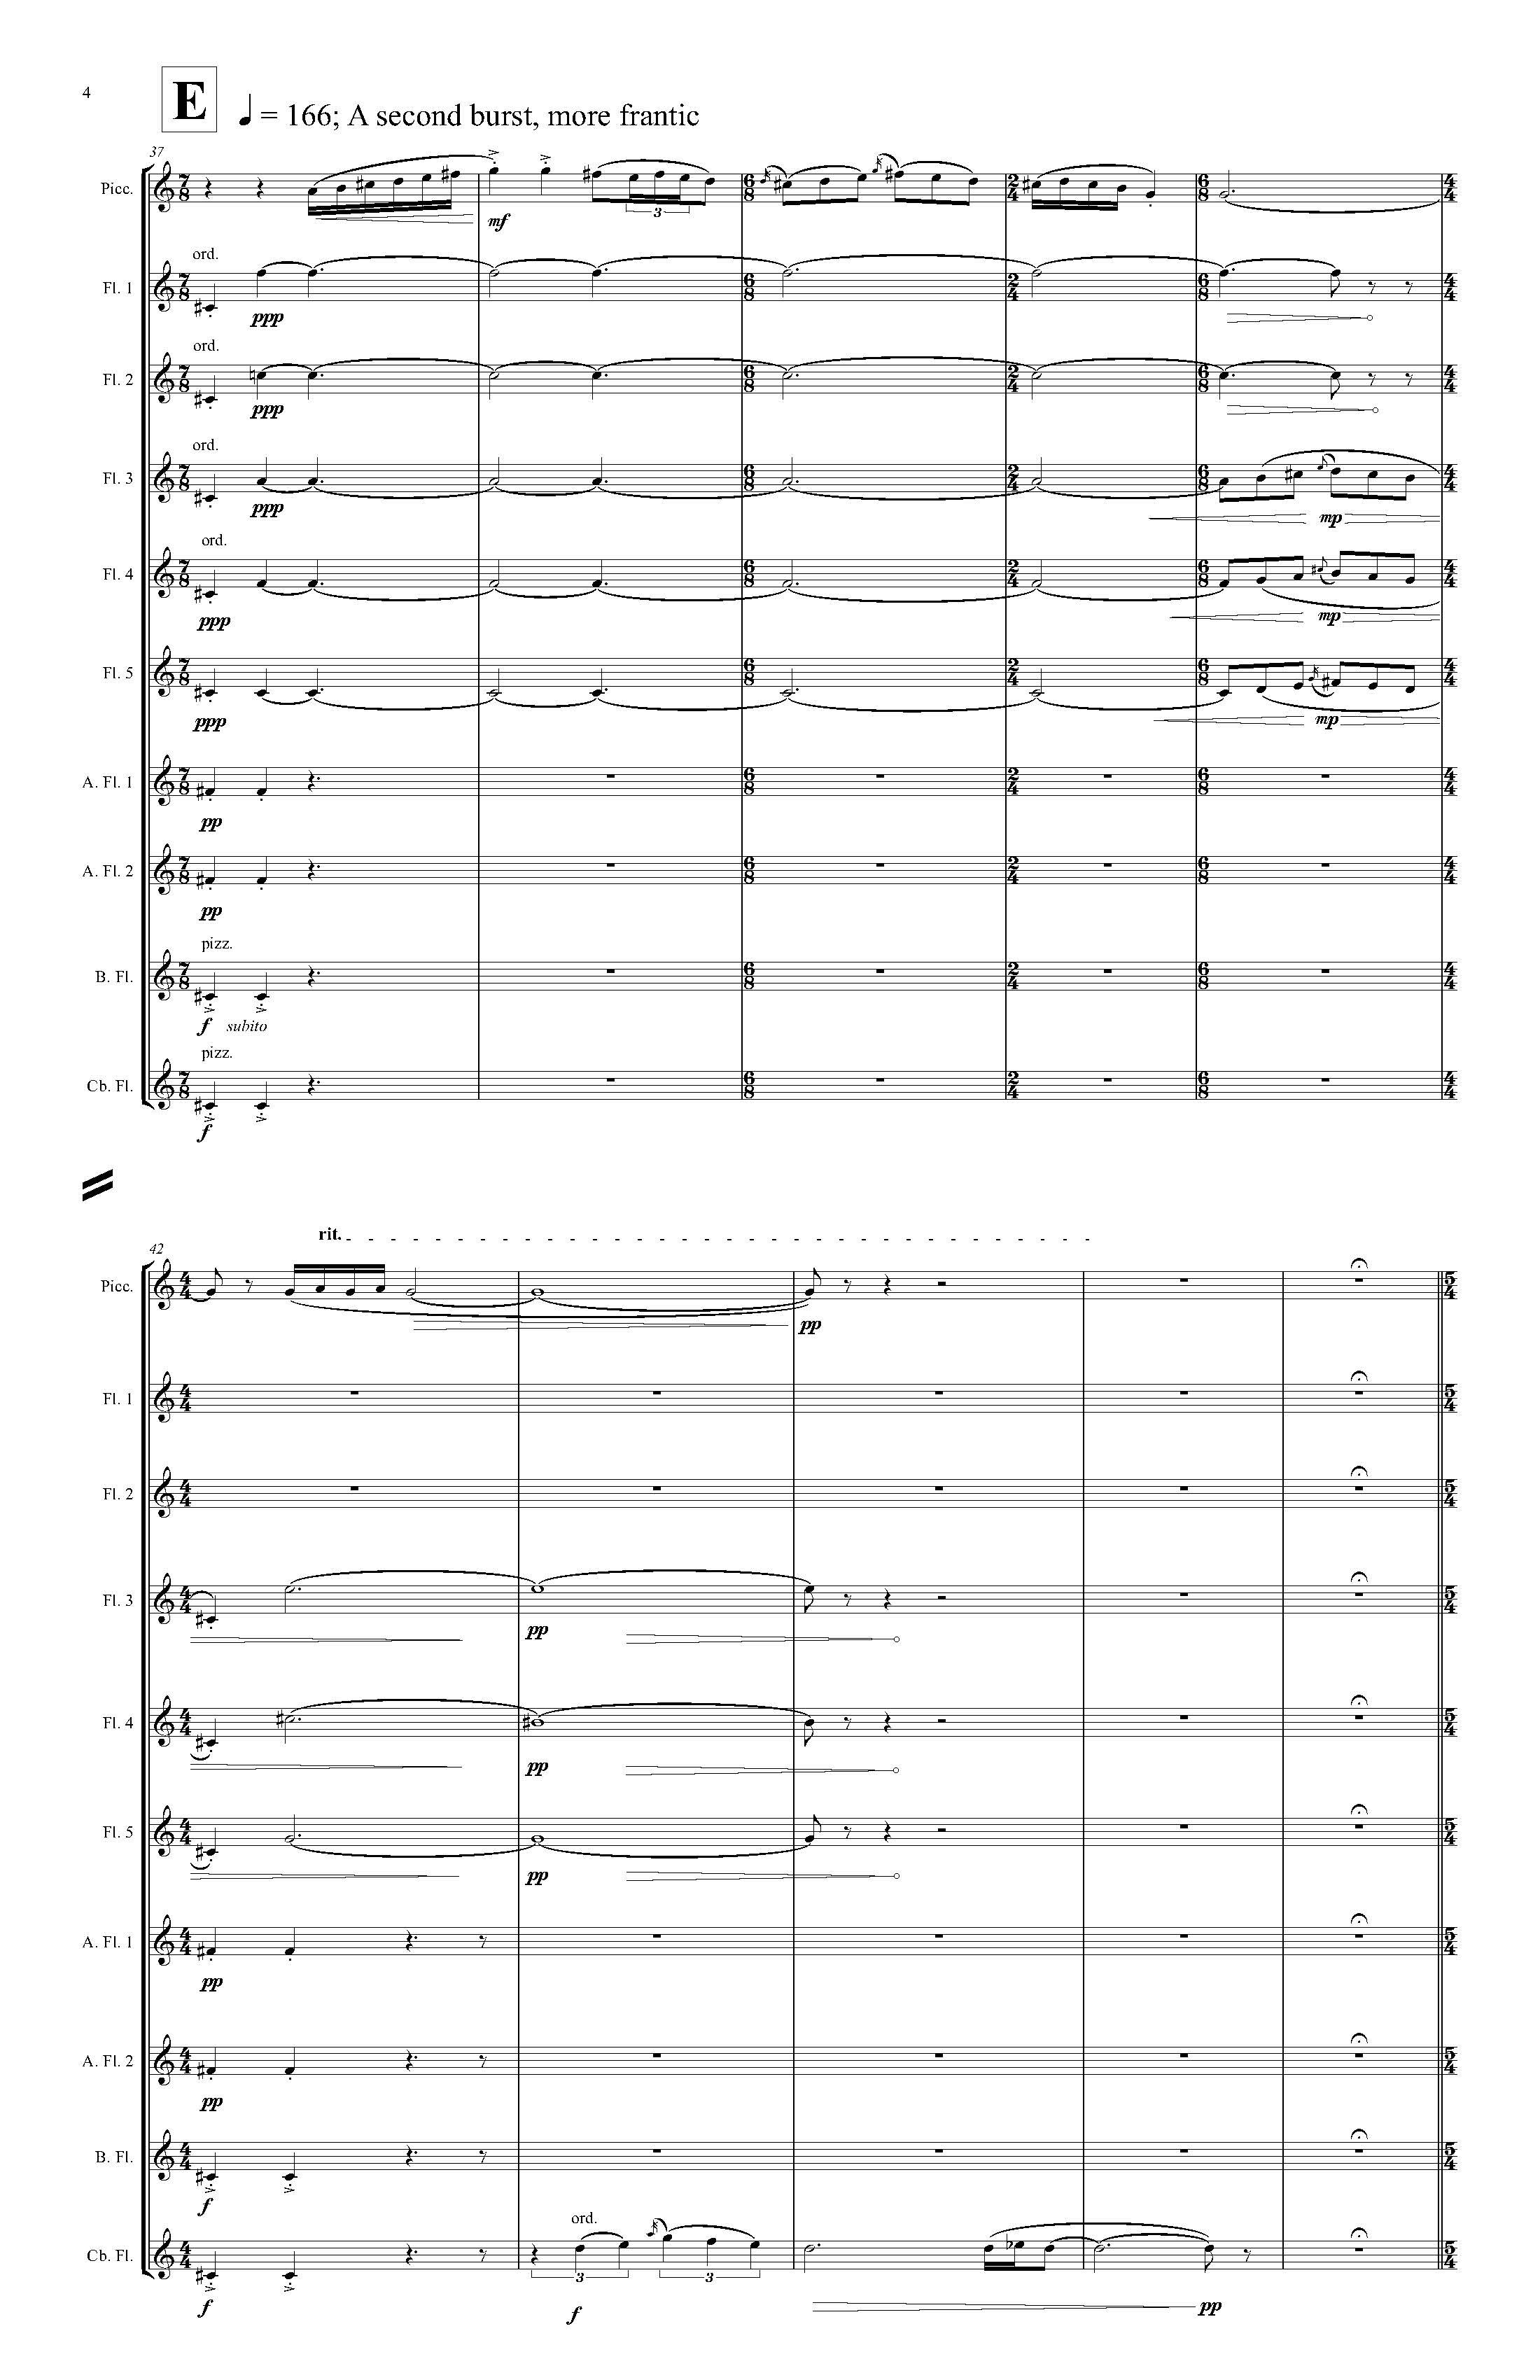 PIPES - Complete Score_Page_10.jpg